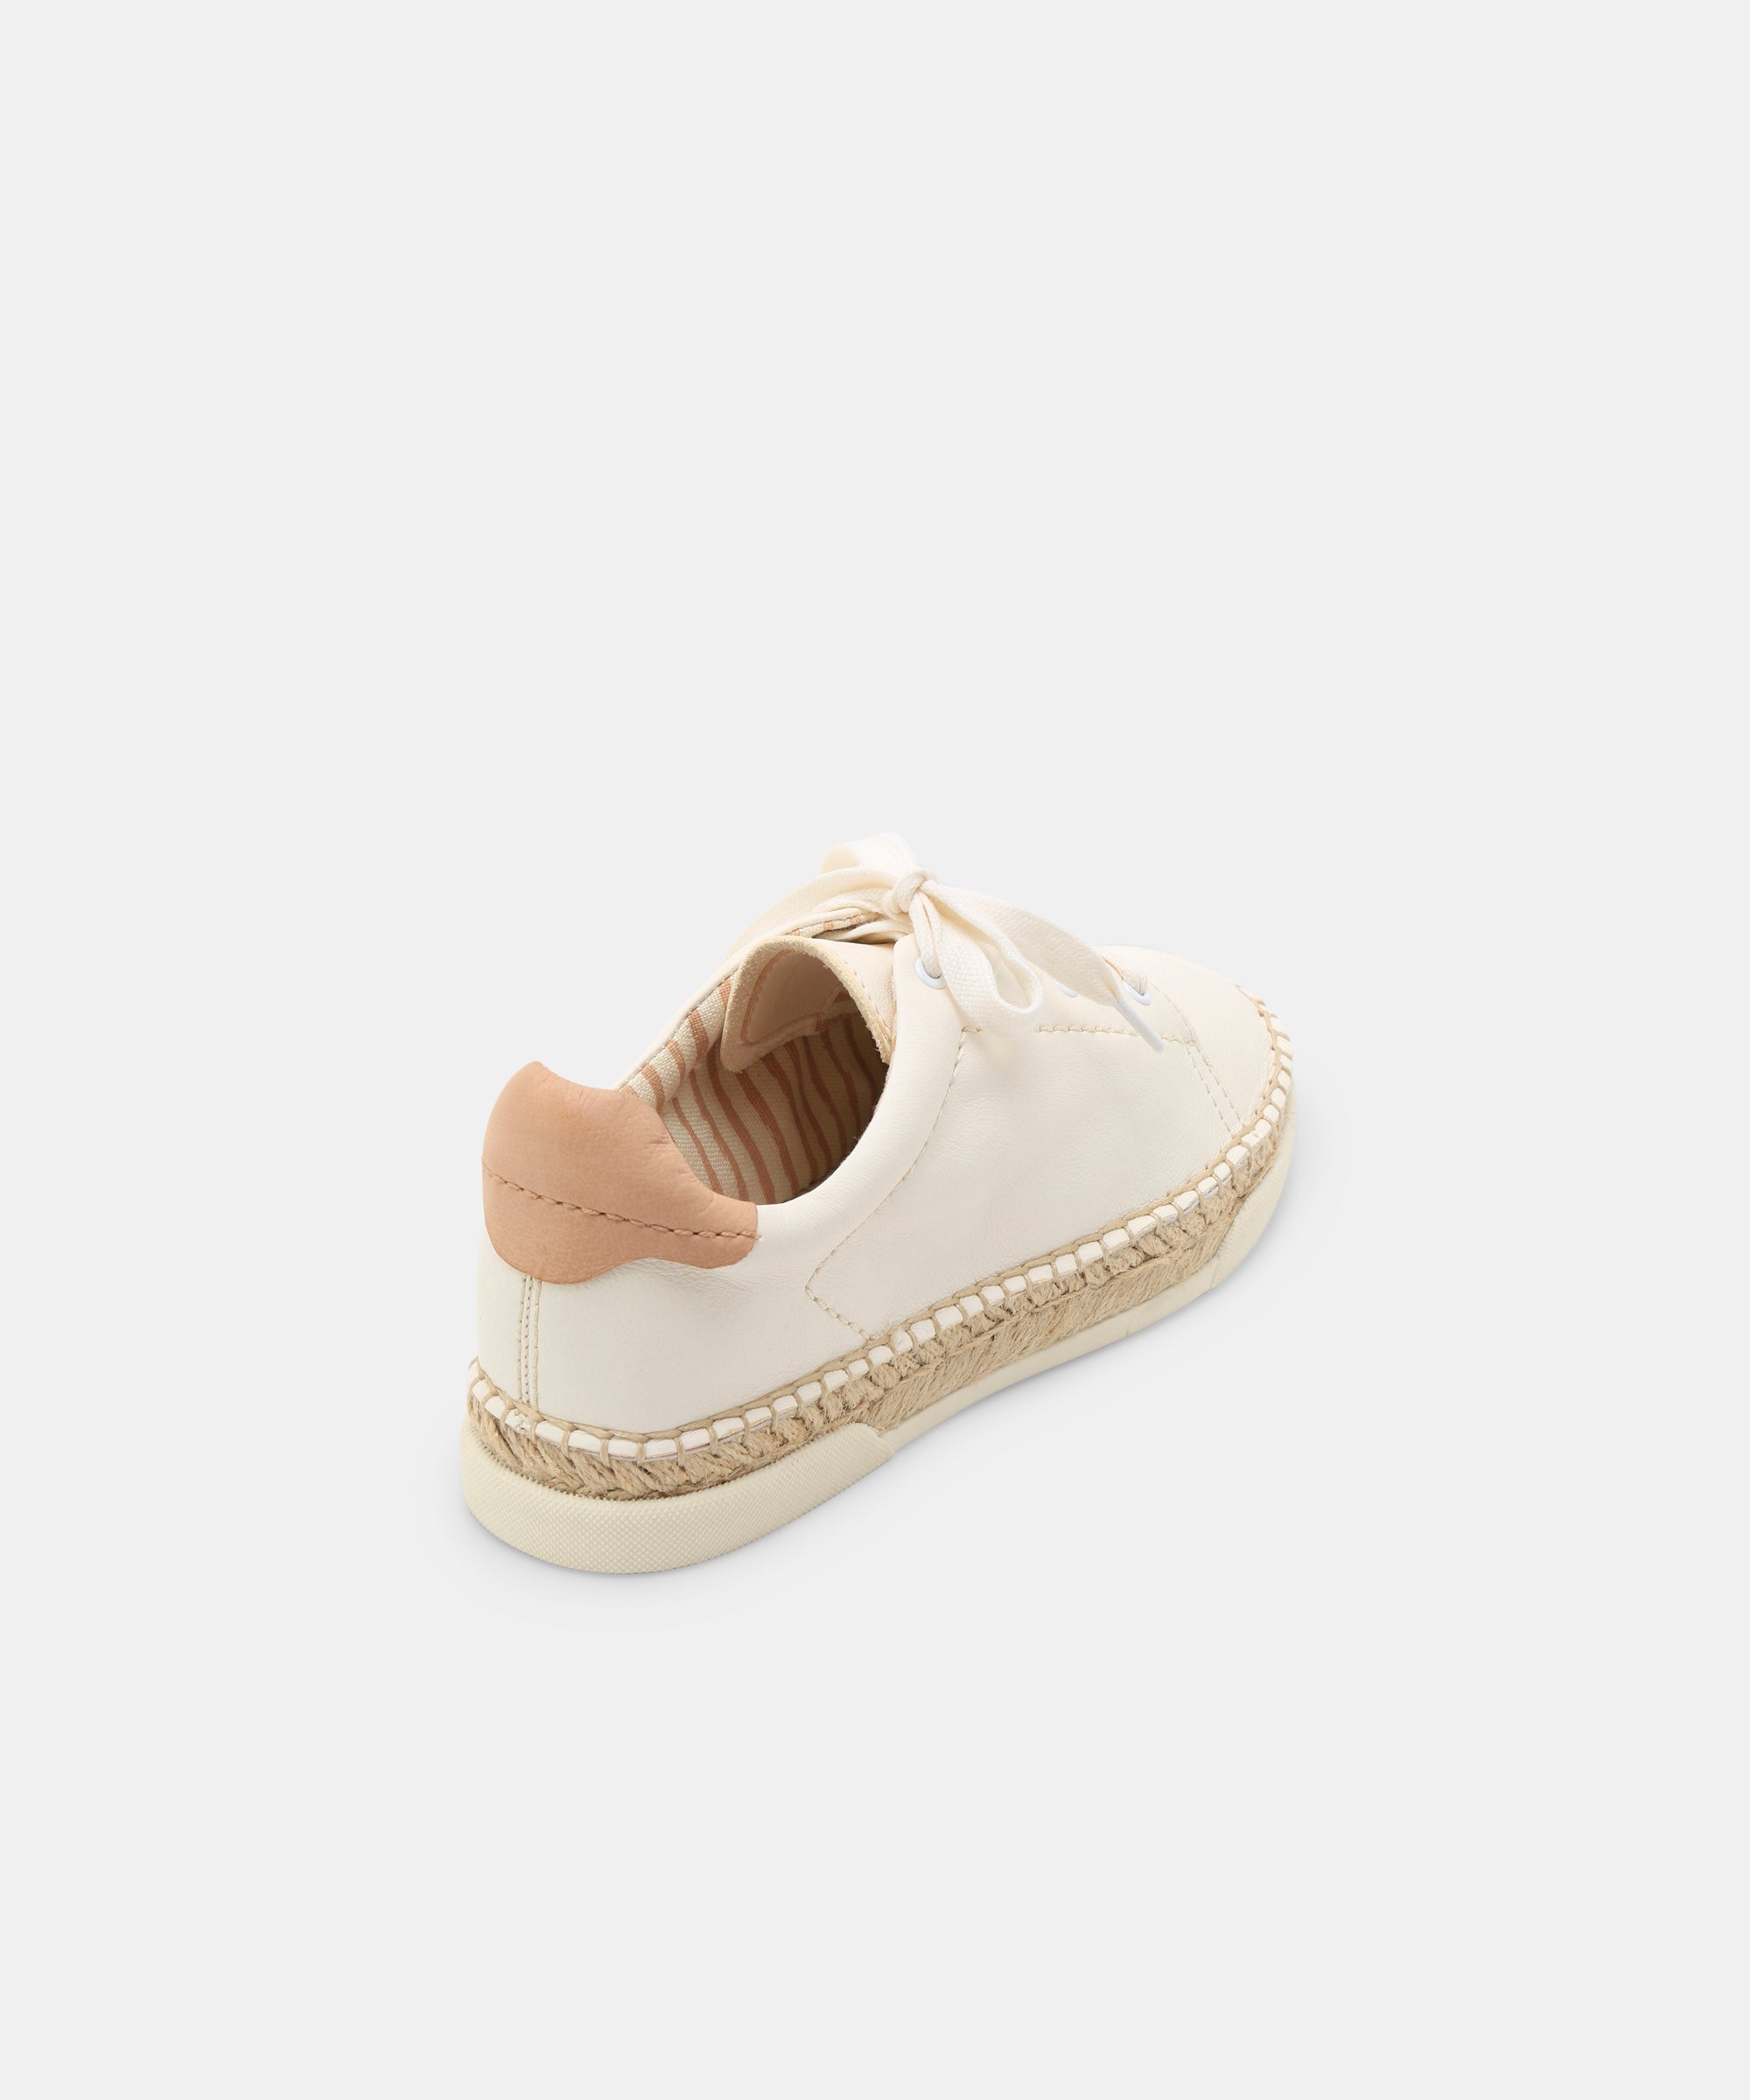 dolce vita madox sneakers white